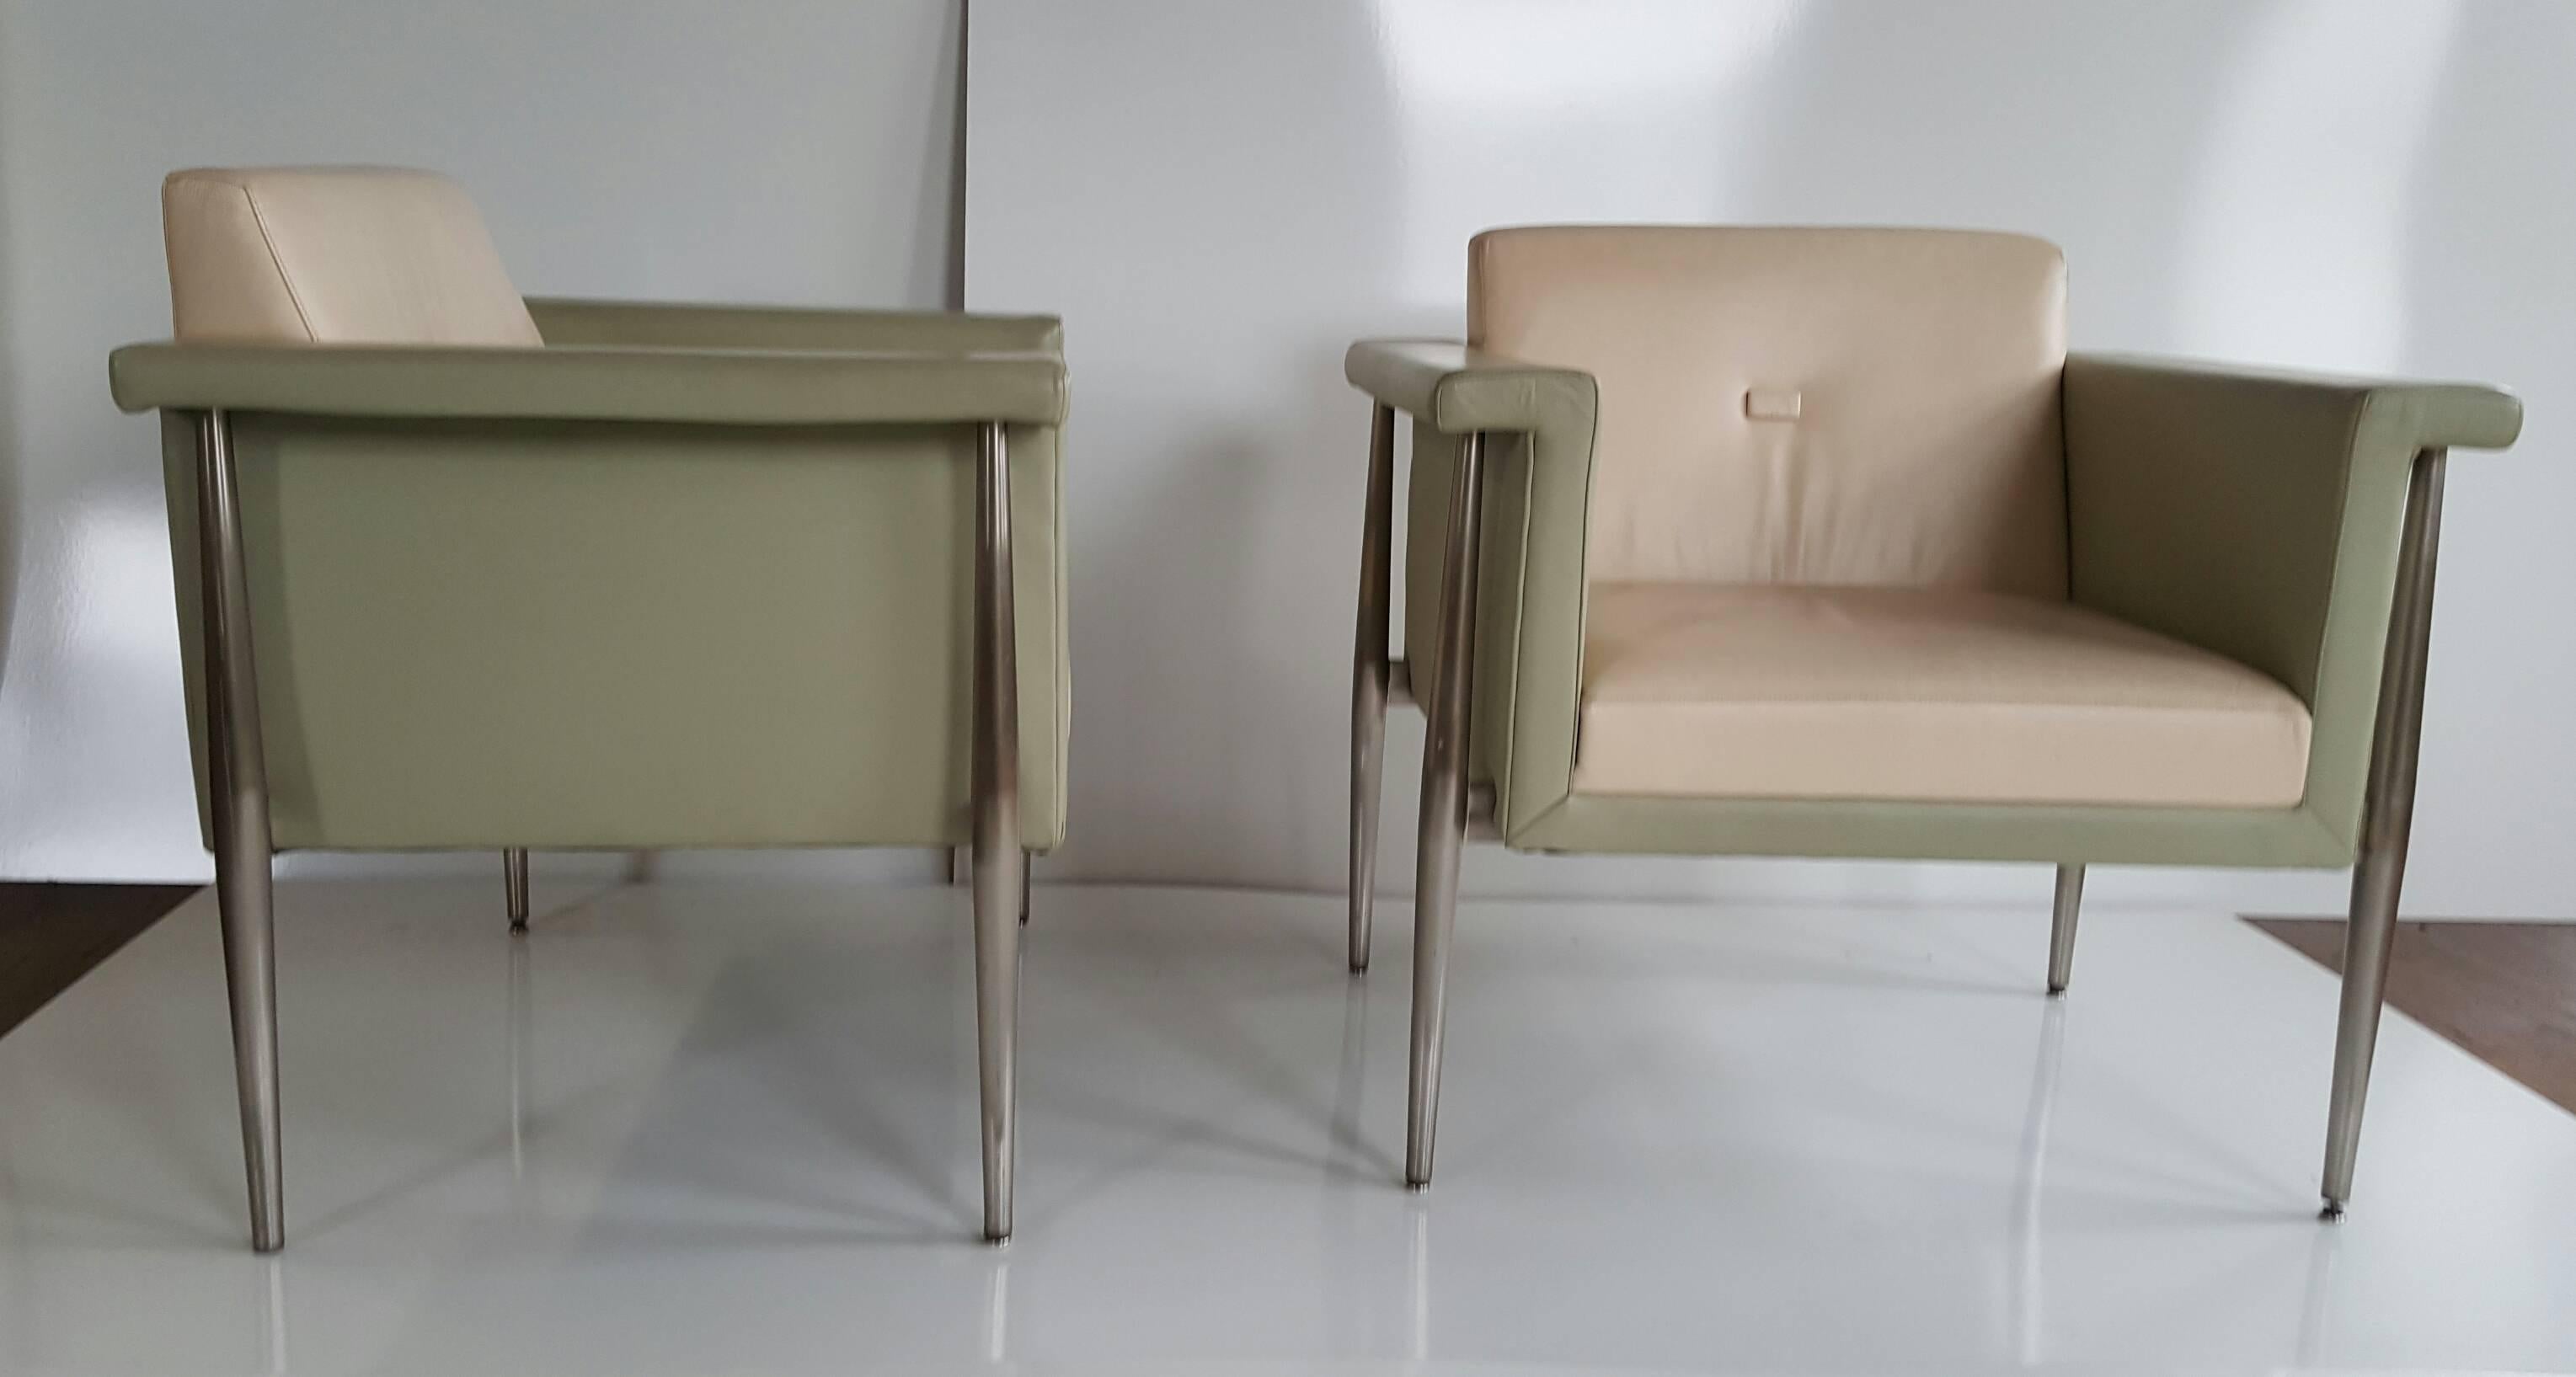 Late 20th Century Memphis Style Two-Tone Leather and Aluminum Lounge Chairs, Bernhardt